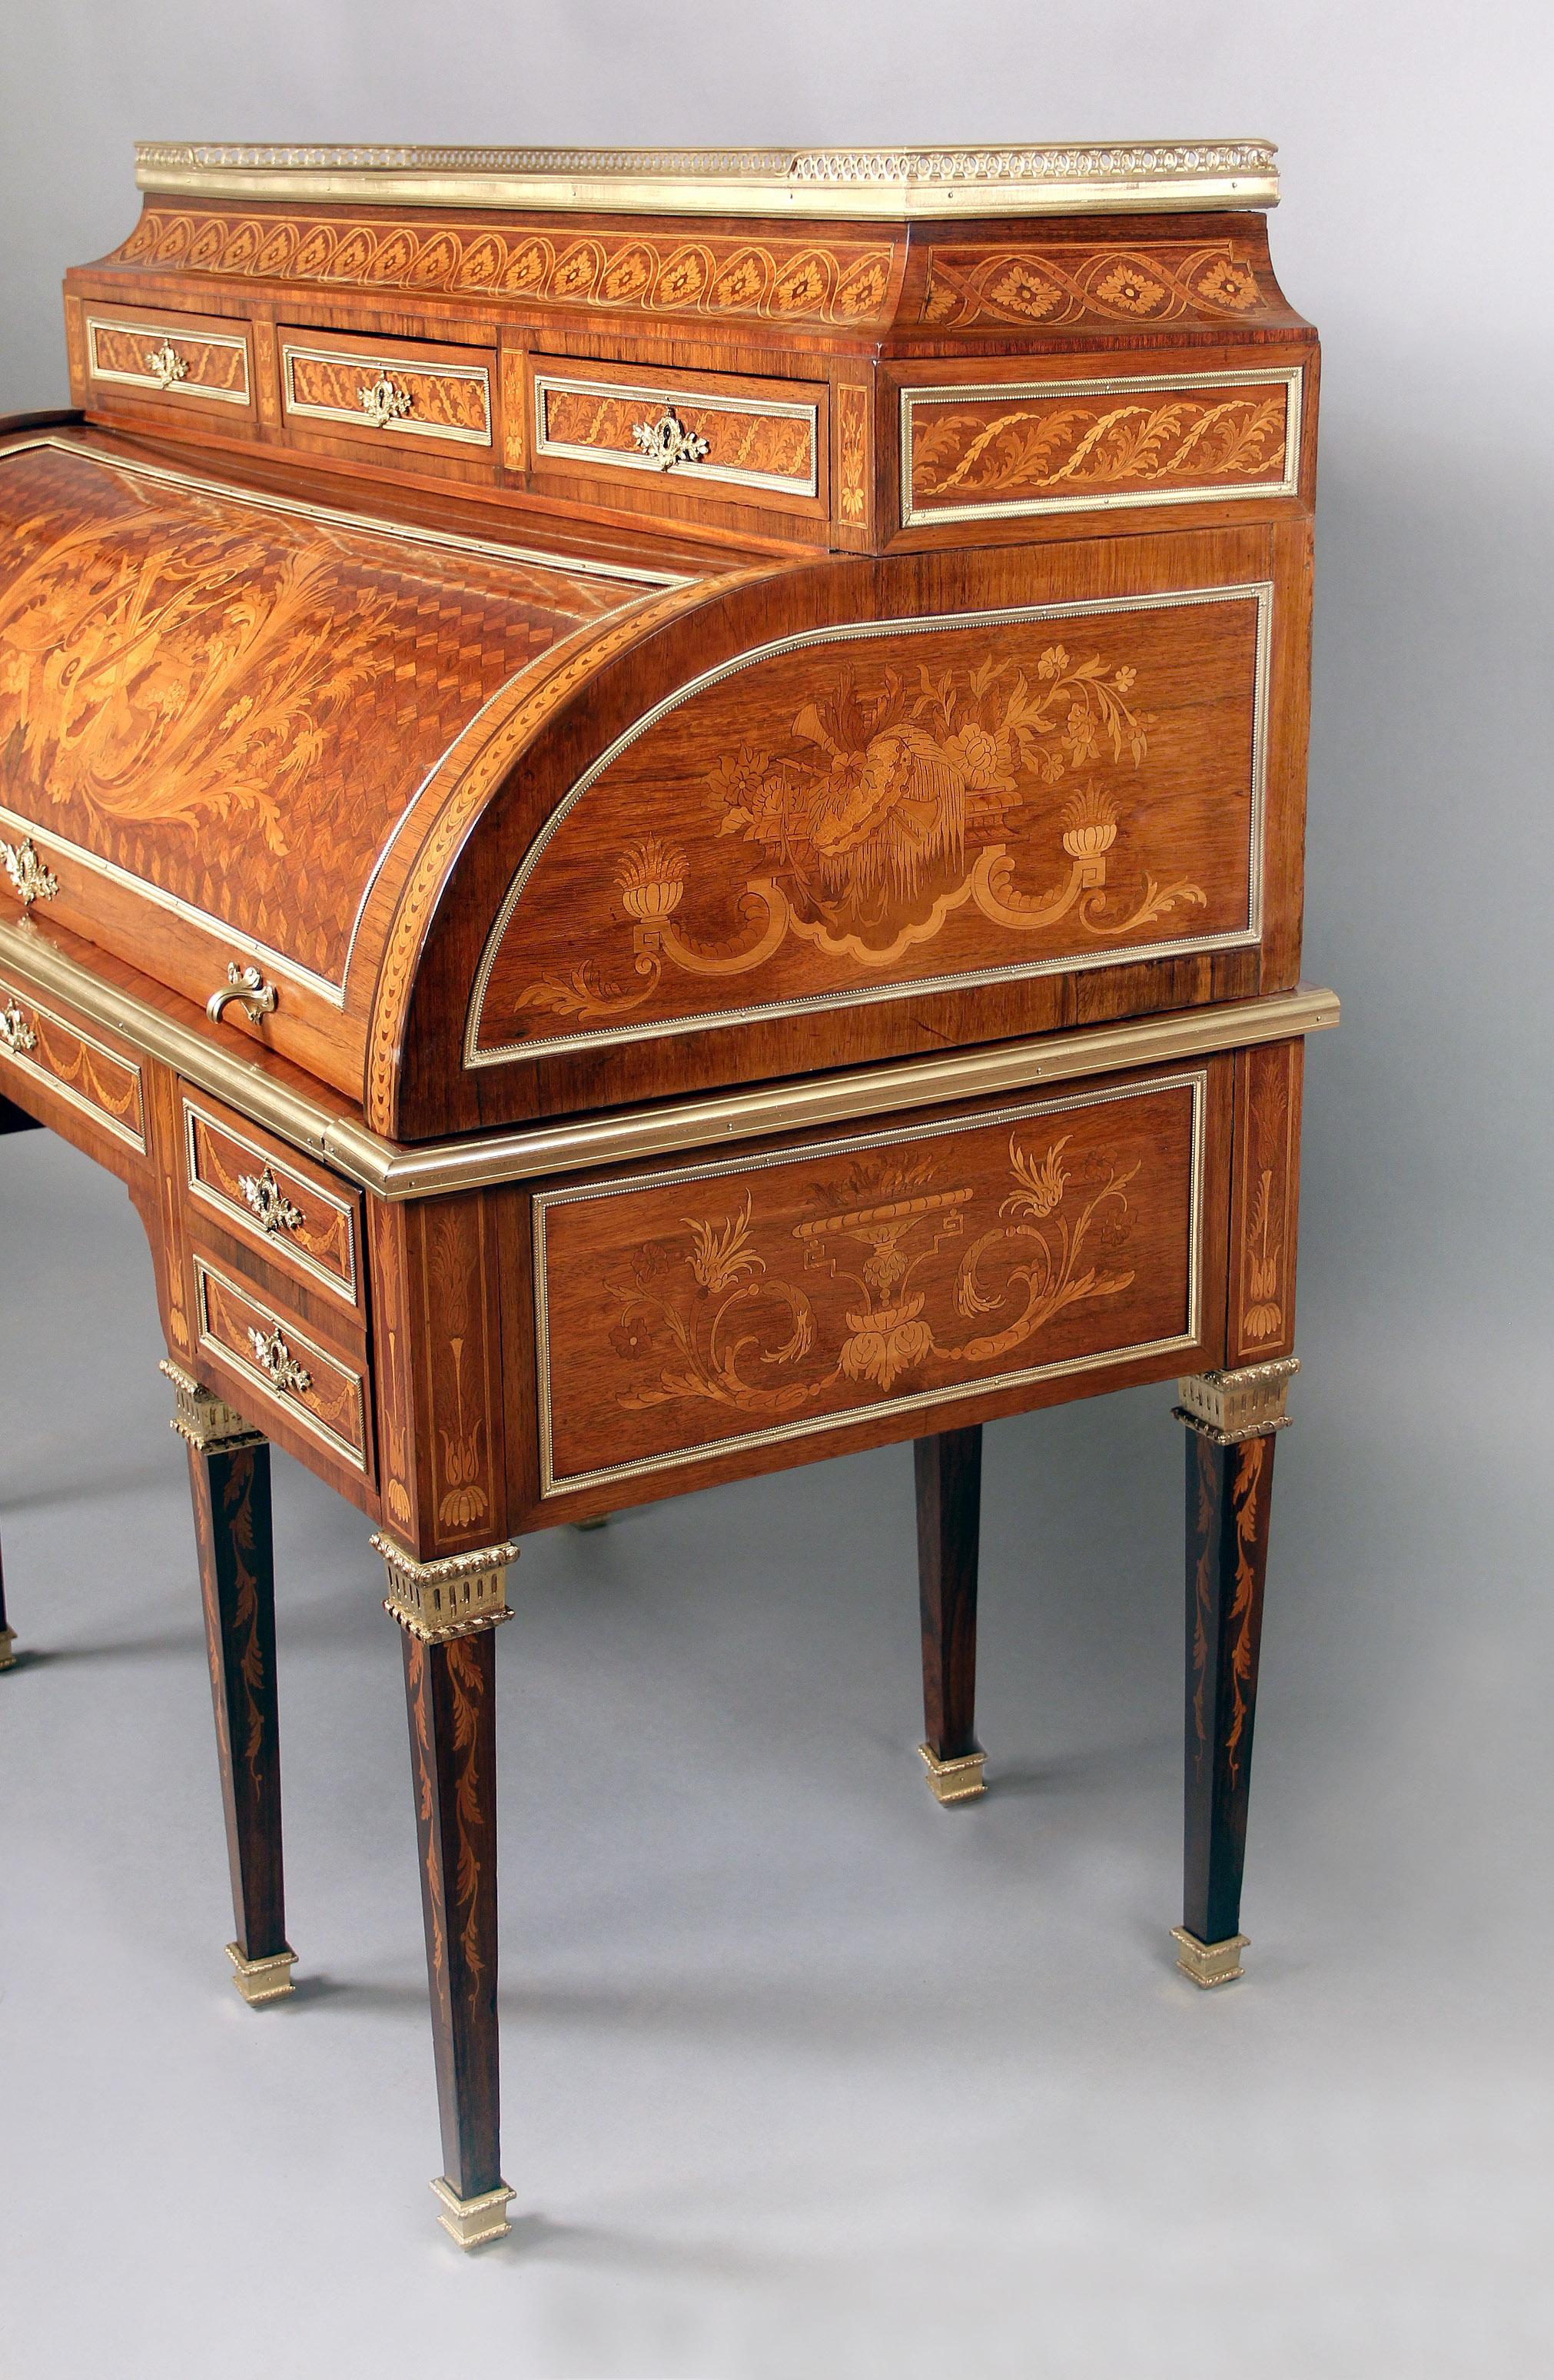 Late 19th Century Gilt Bronze Mounted Inlaid Marquetry Bureau a Cylindre In Good Condition For Sale In New York, NY